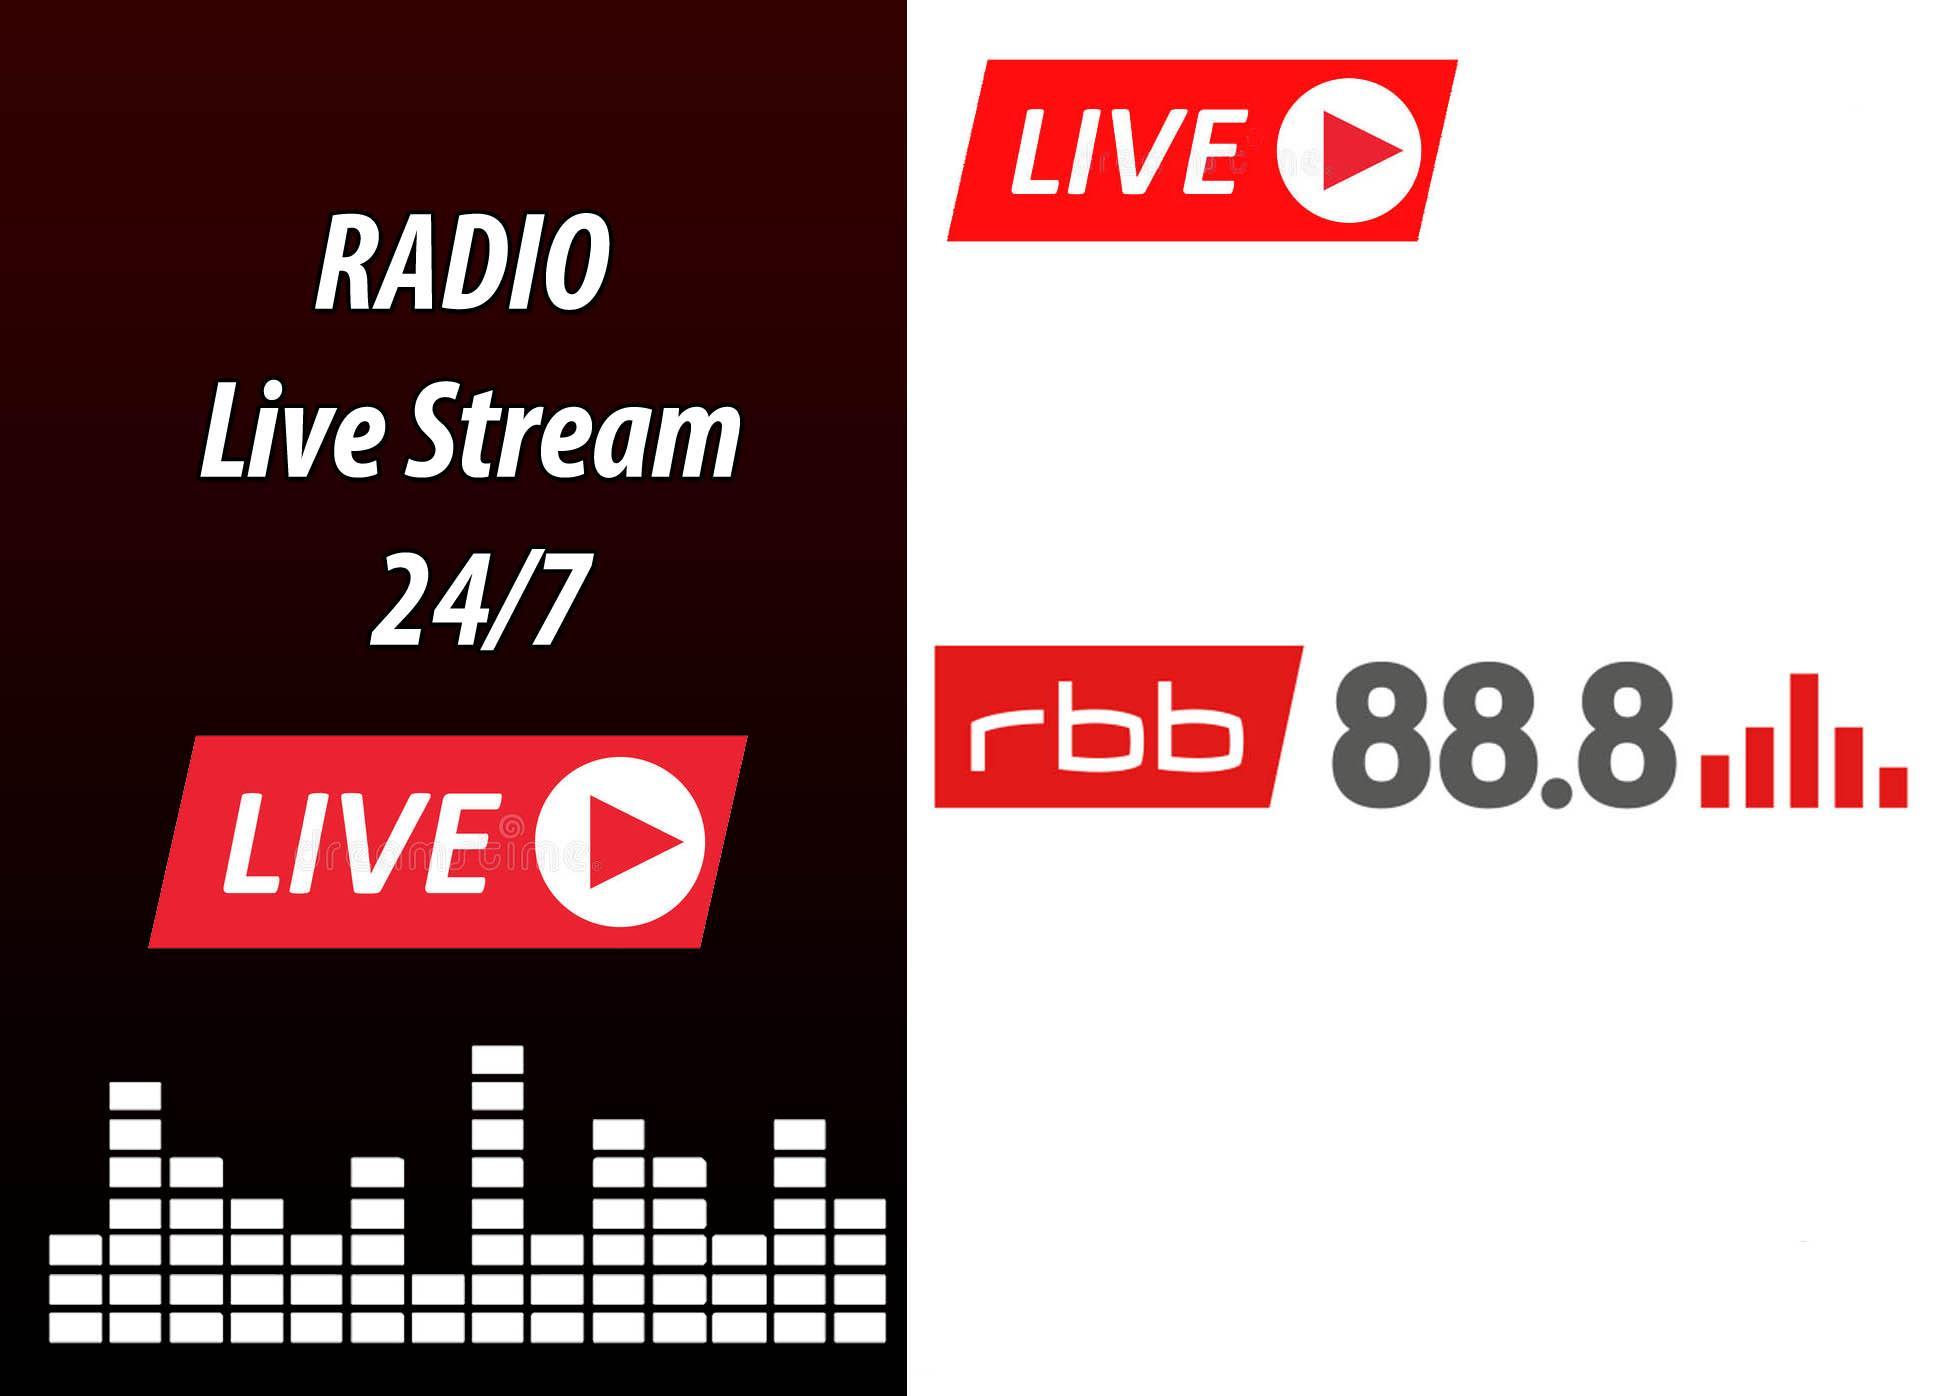 Berlin Radio rbb 88.8 24/7 for Android - APK Download